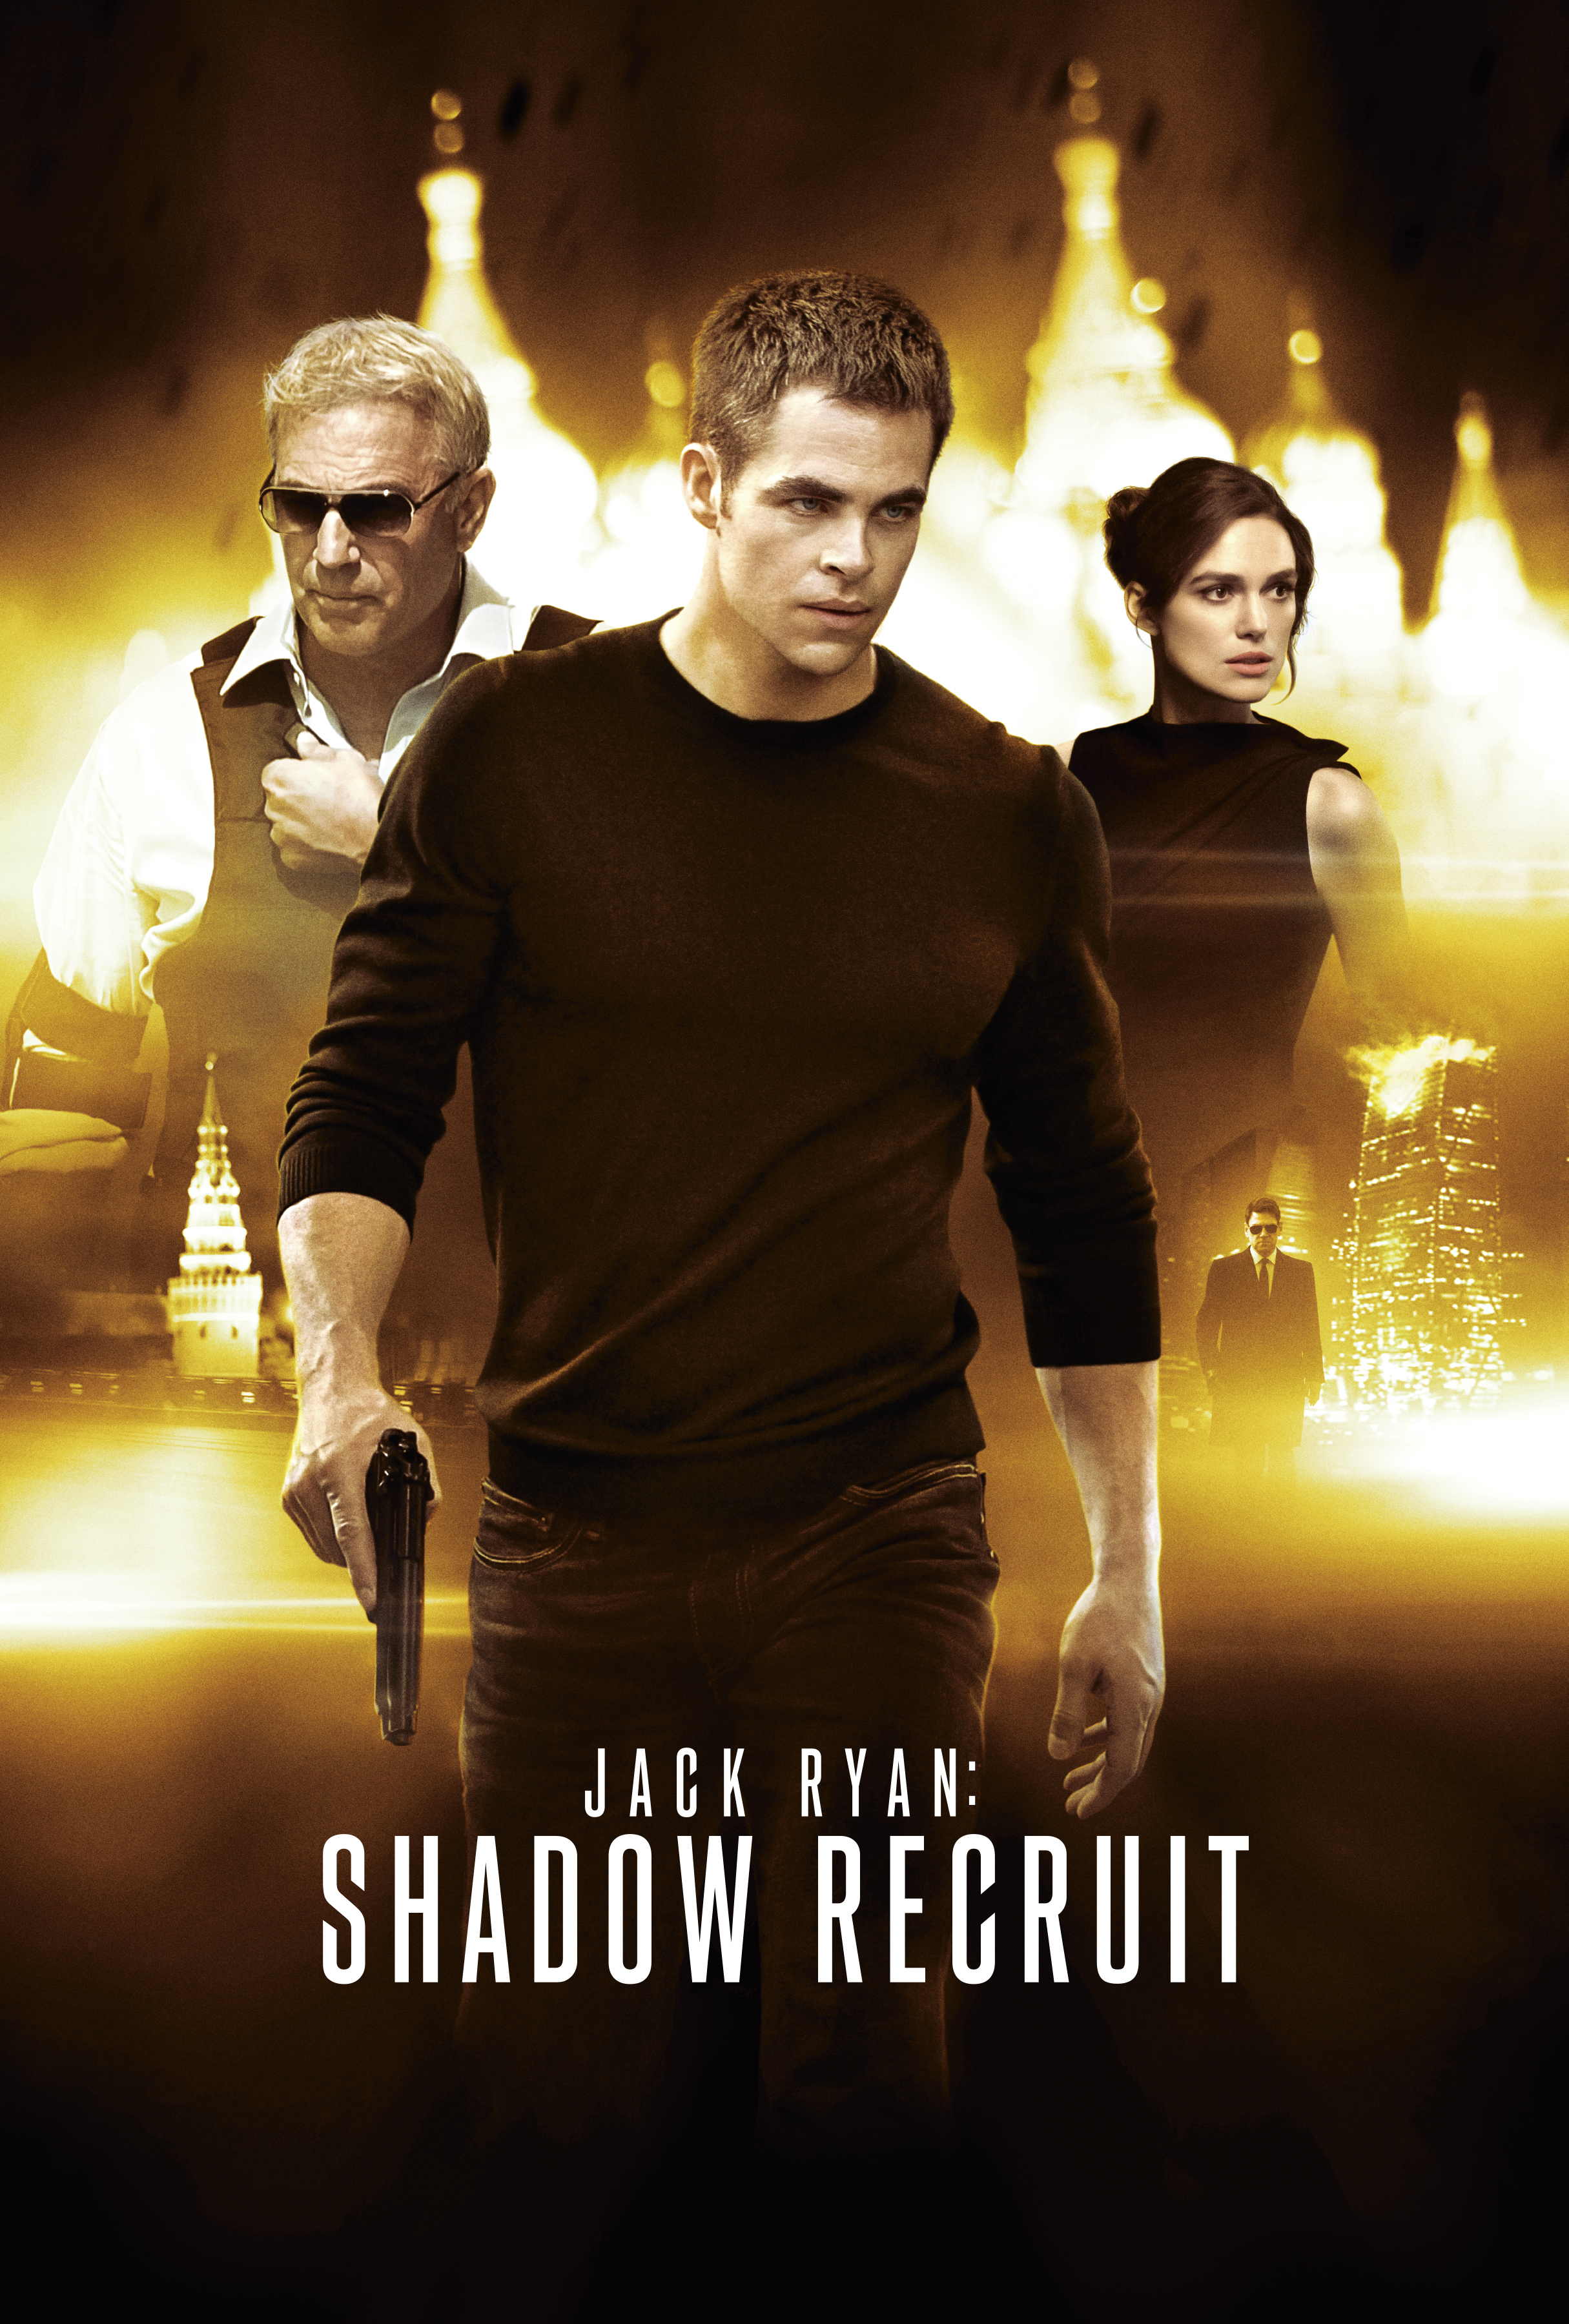 Tom Clancys Iconic Hero Returns in JACK RYAN SHADOW RECRUIT, a Sensational New Action Thriller Debuting on Blu-ray, DVD and VOD on June 10, 2014 Business Wire